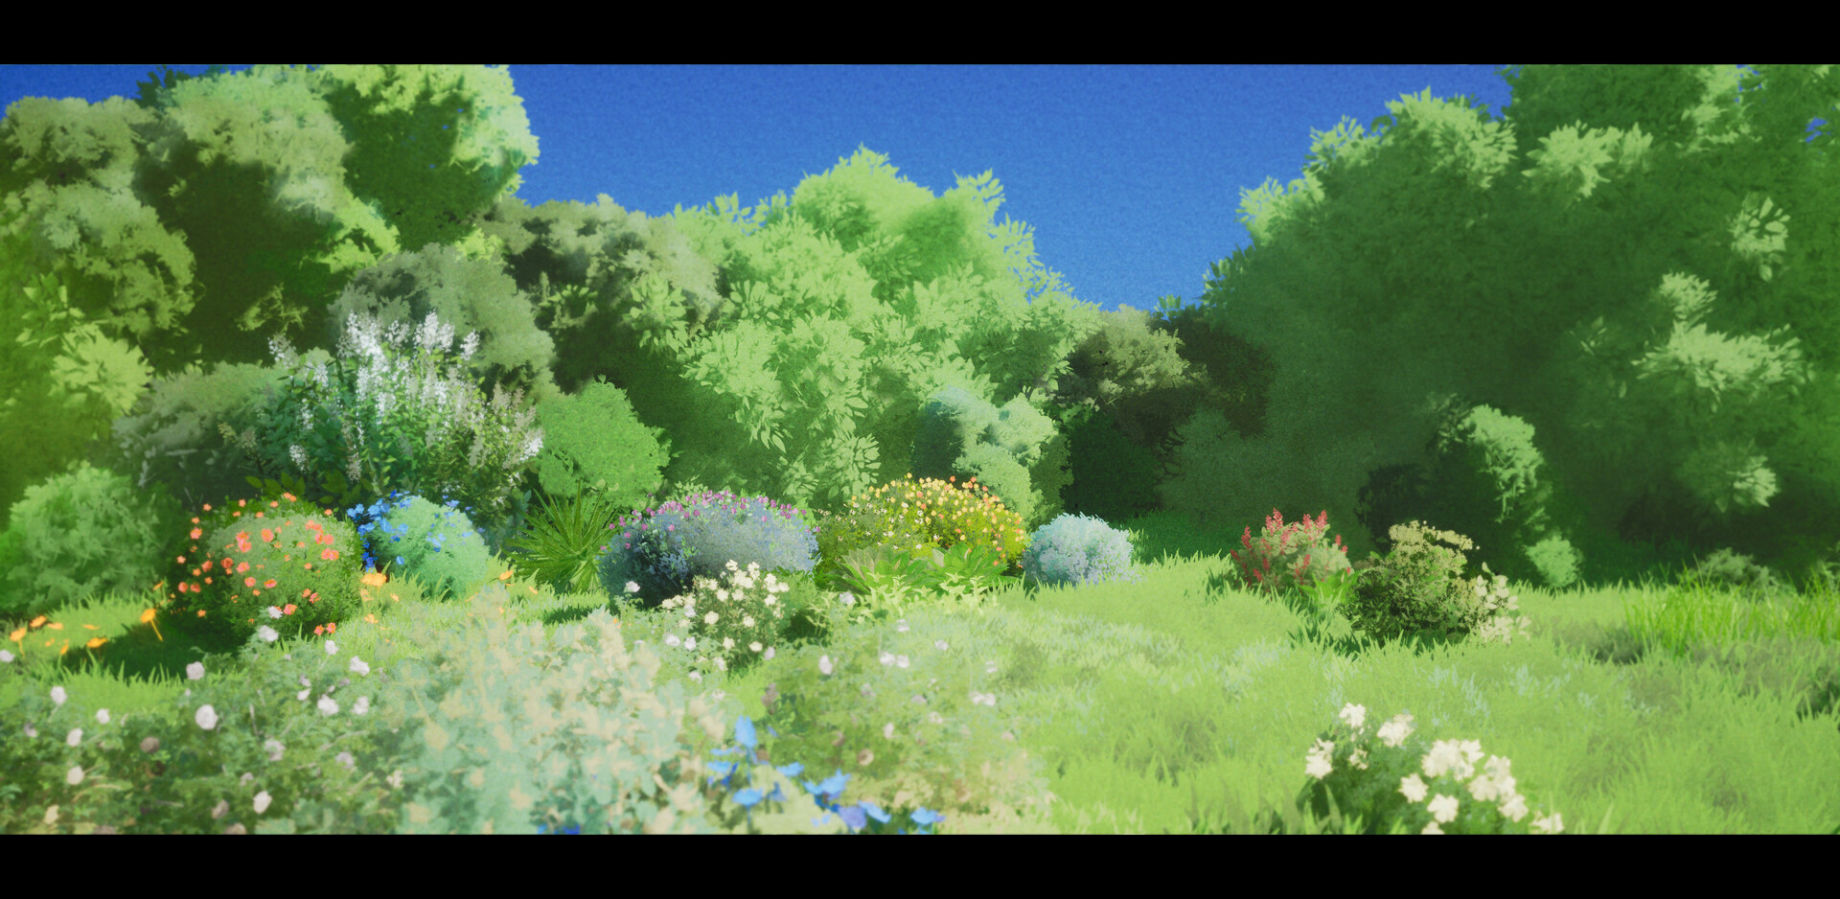 Colorful Stylized 3D Environment Inspired by Studio Ghibli